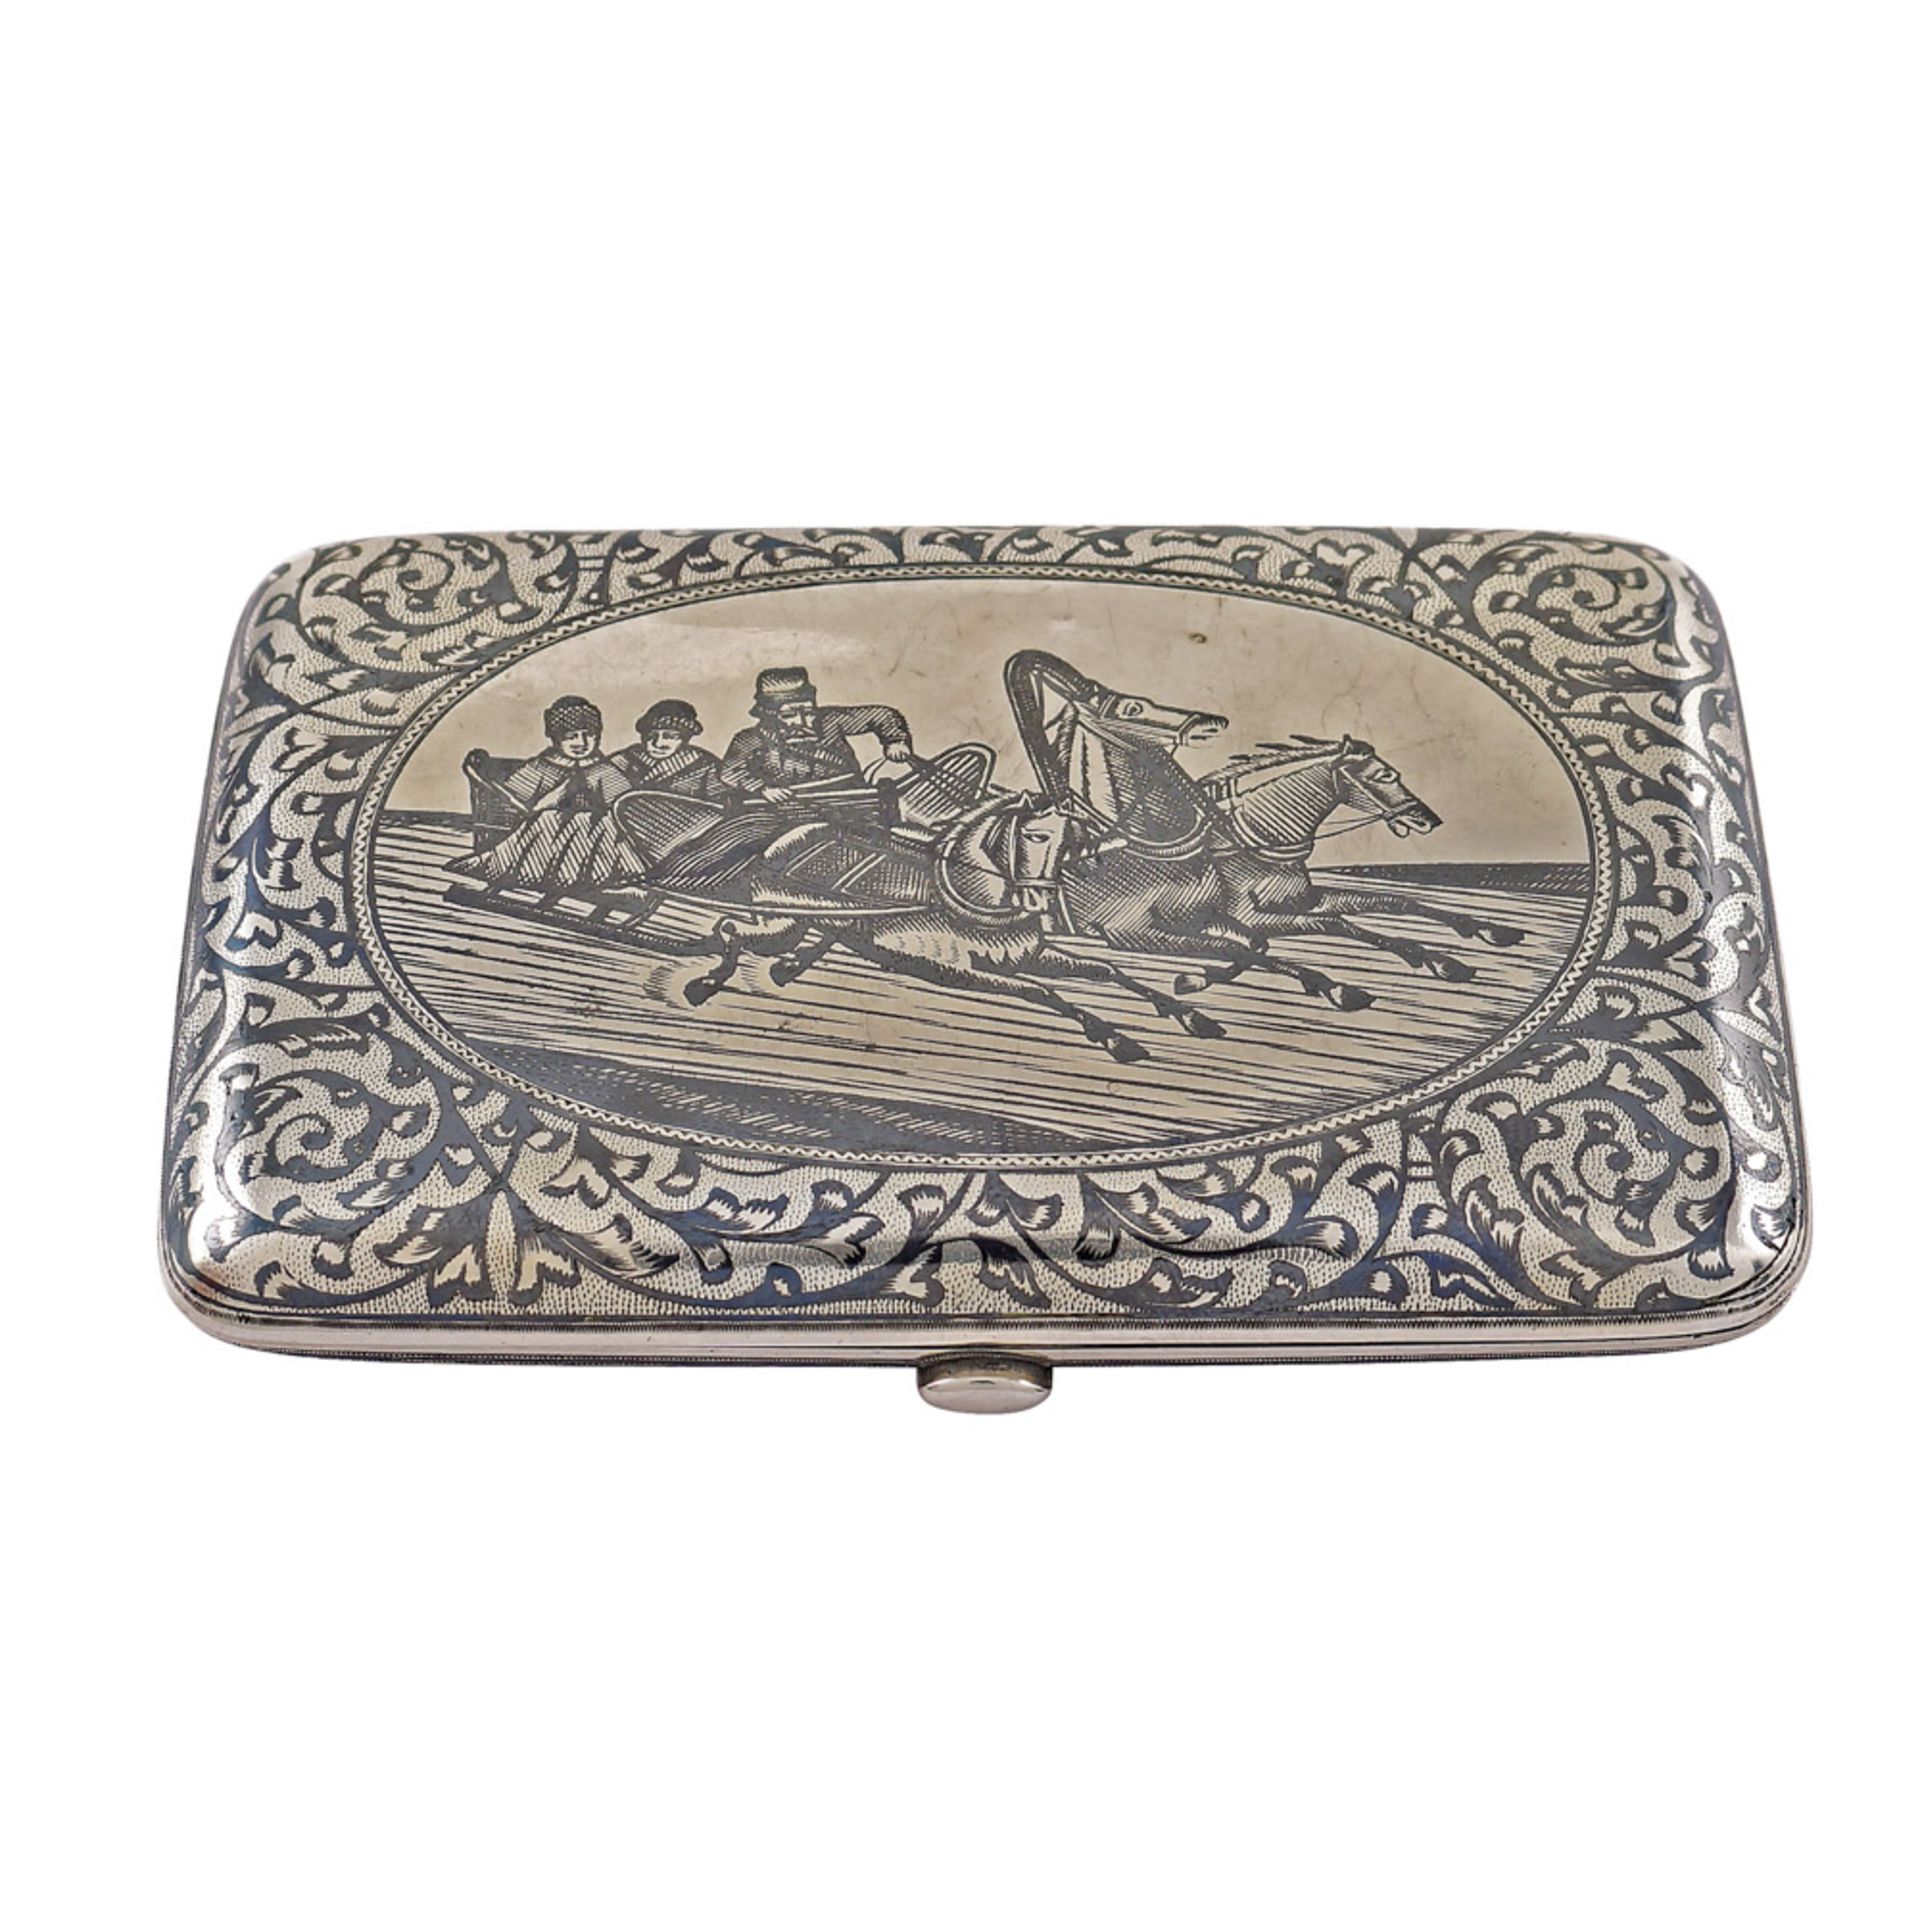 A niello silver snuffbox Russia, 19th century weight 130 gr. carved surface featuring a Troika